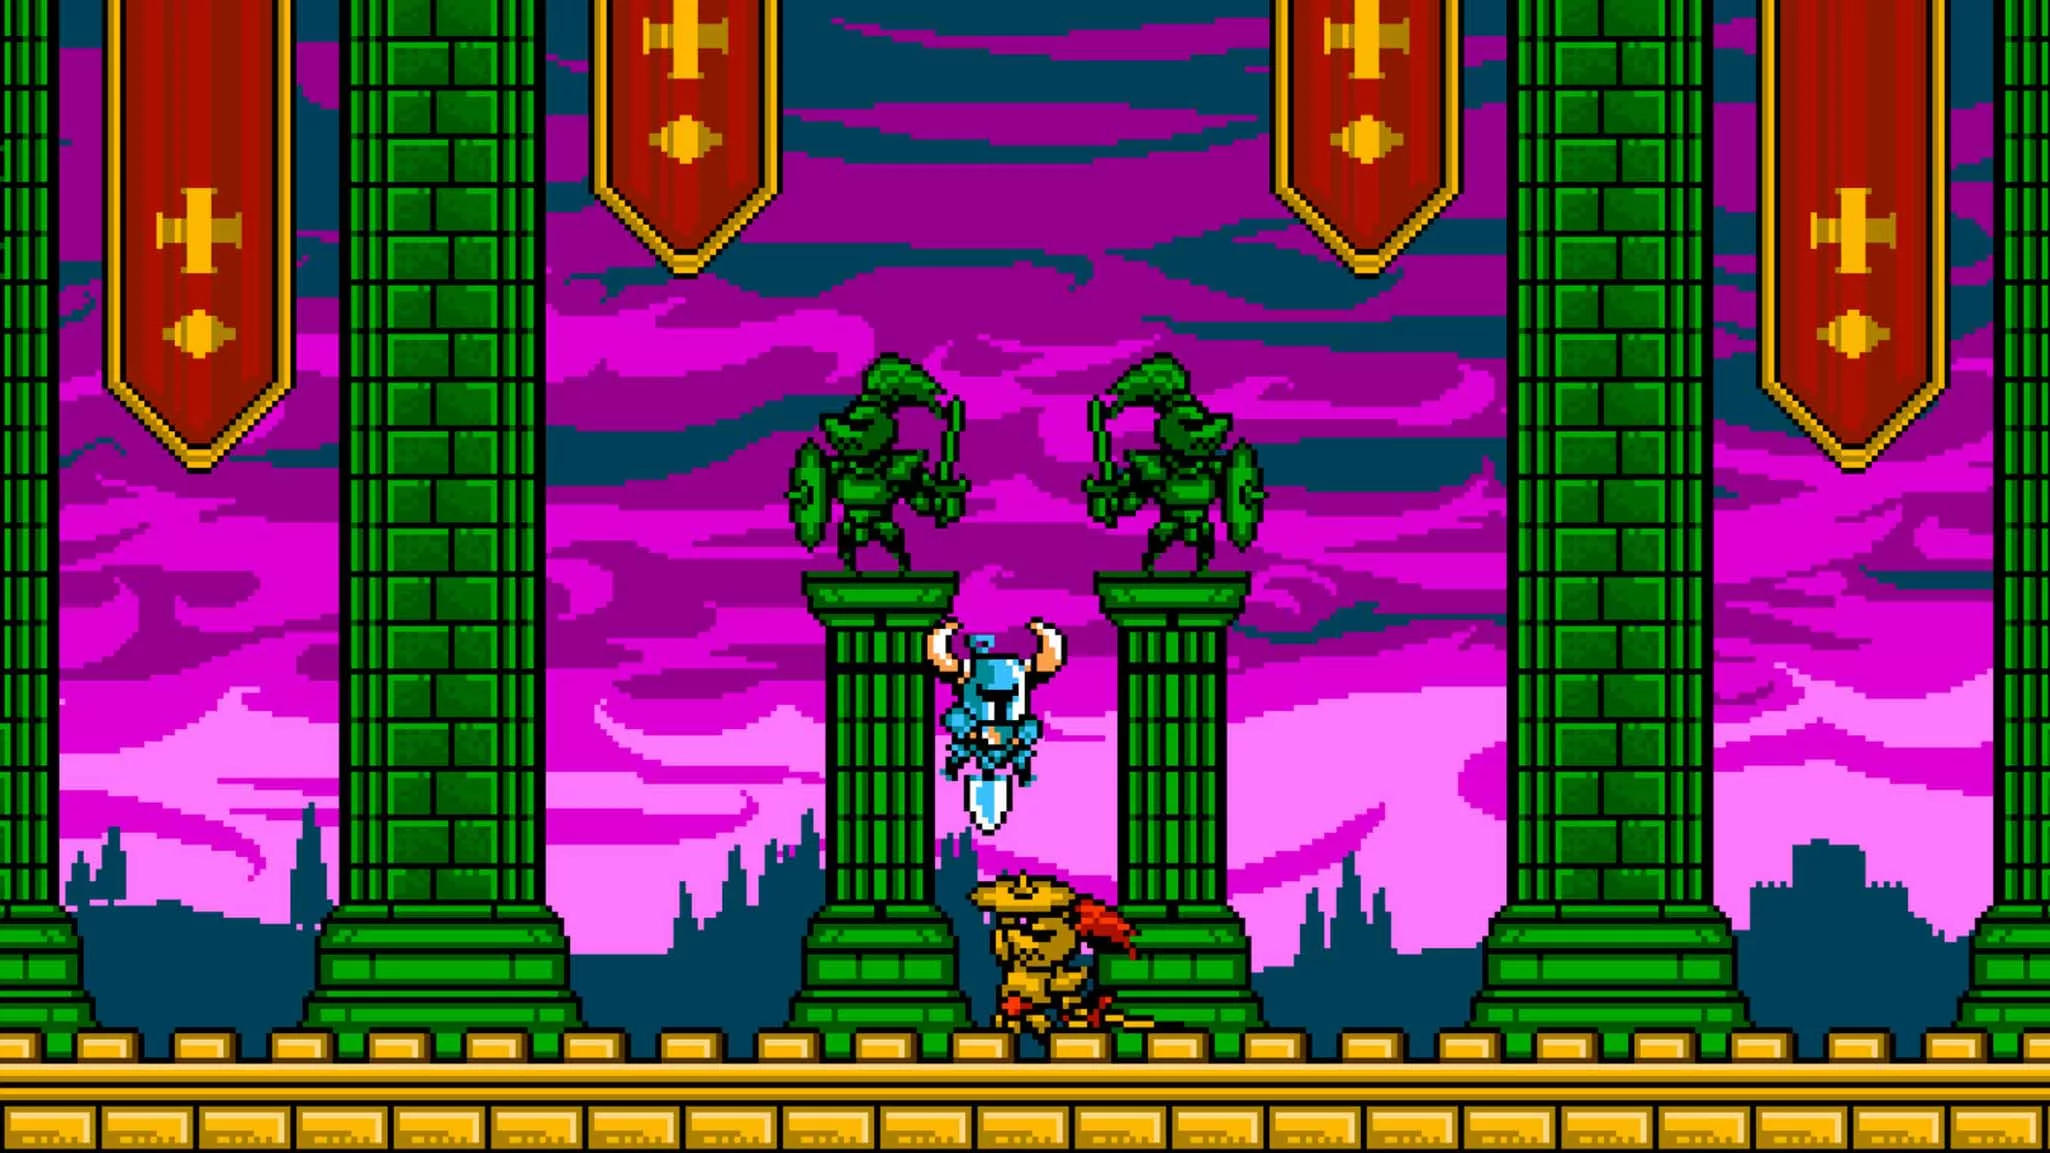 Screenshot of a pixel-art knight jumping on an enemy with a shovel as a weapon.